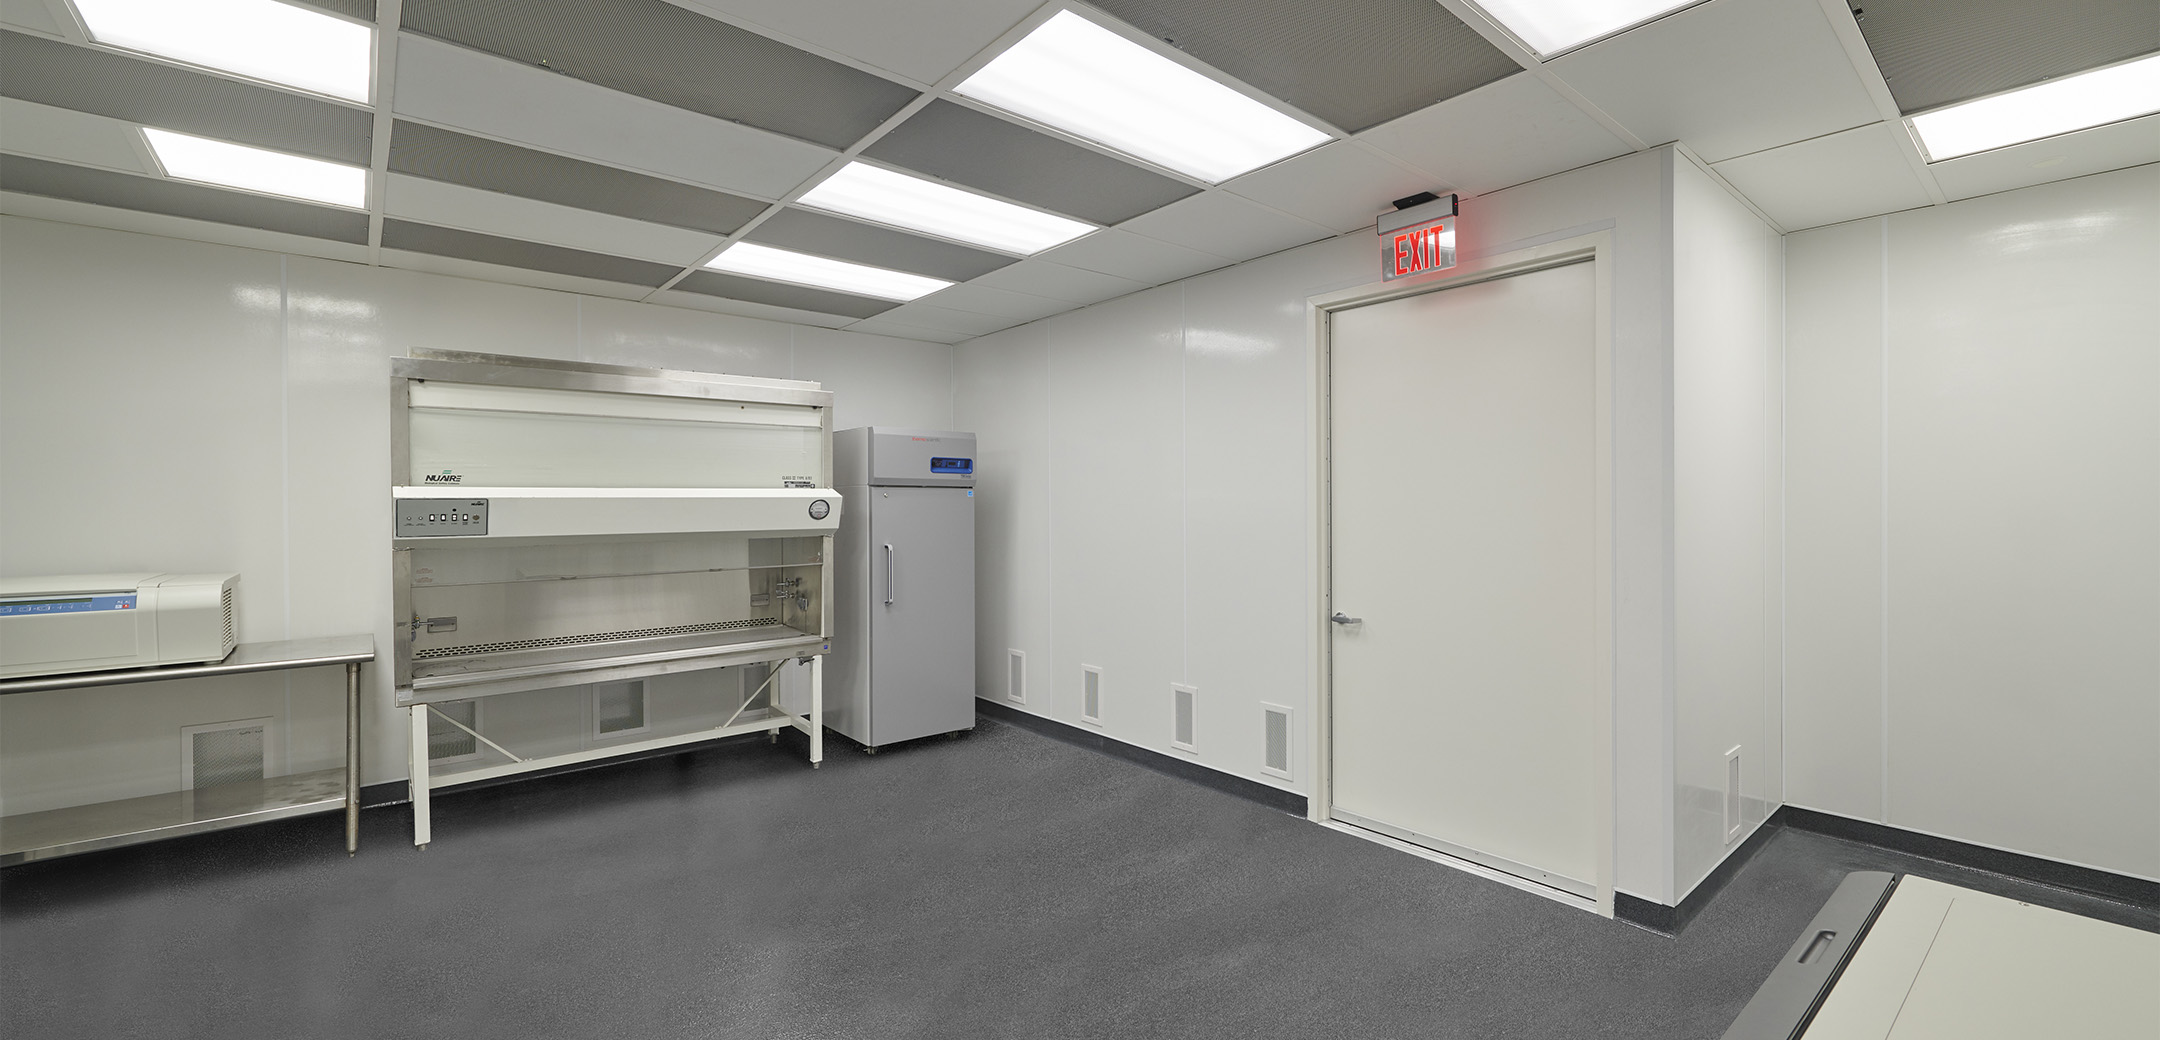 A view of the Charles River Clean Room with panel lighting, gray flooring and white walls, showcasing the large exit door and sanitization equipment along the wall.